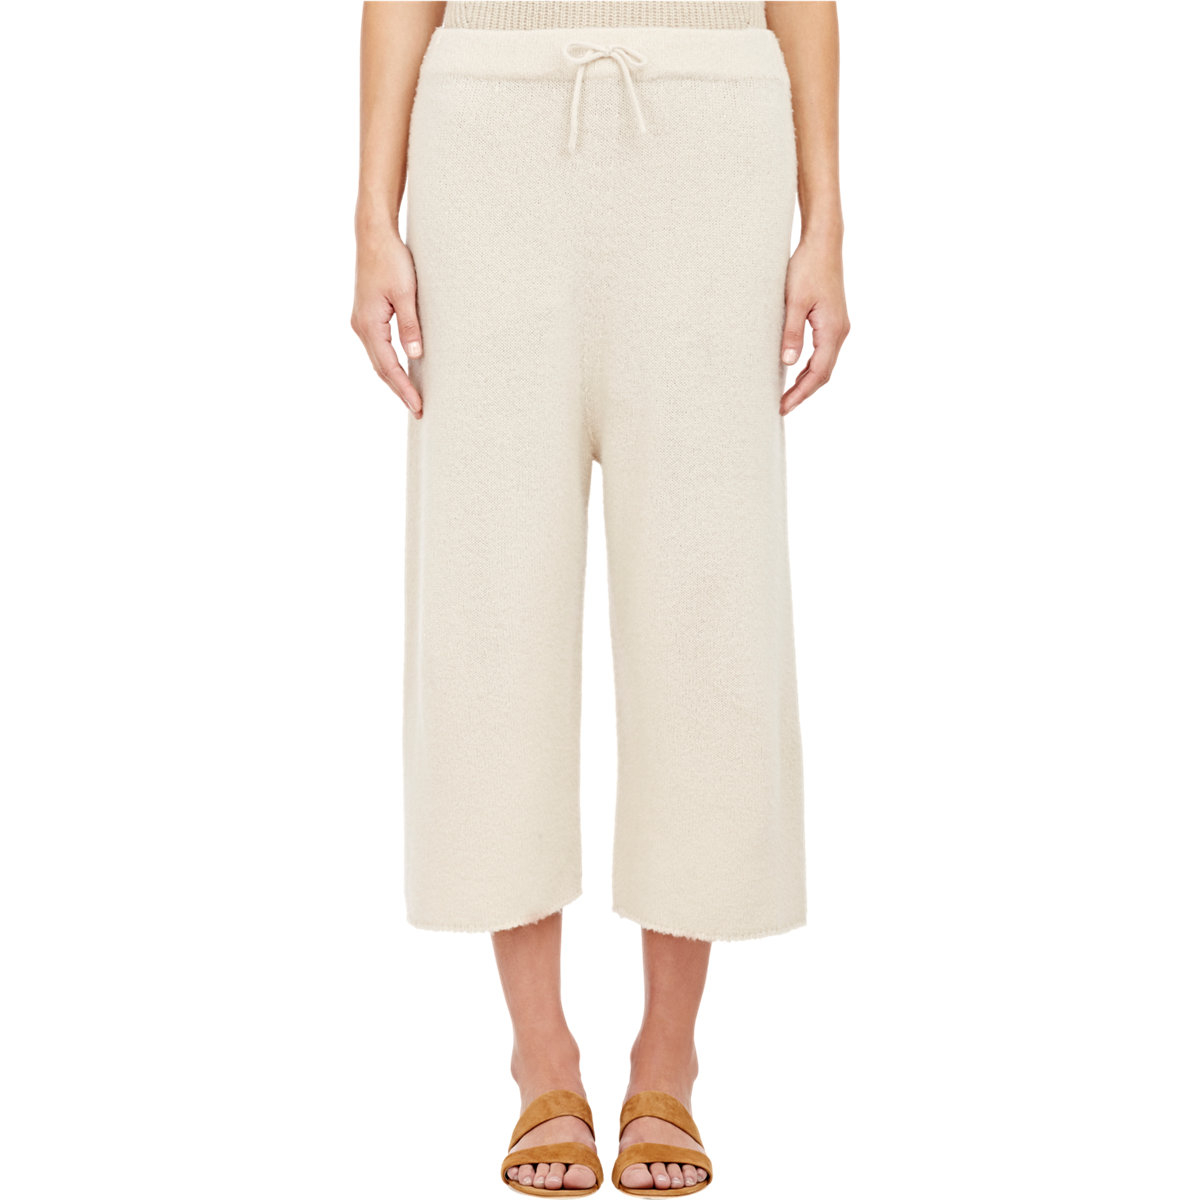 Lyst - The Row Cropped Cashmere-Blend Sweatpants in Natural